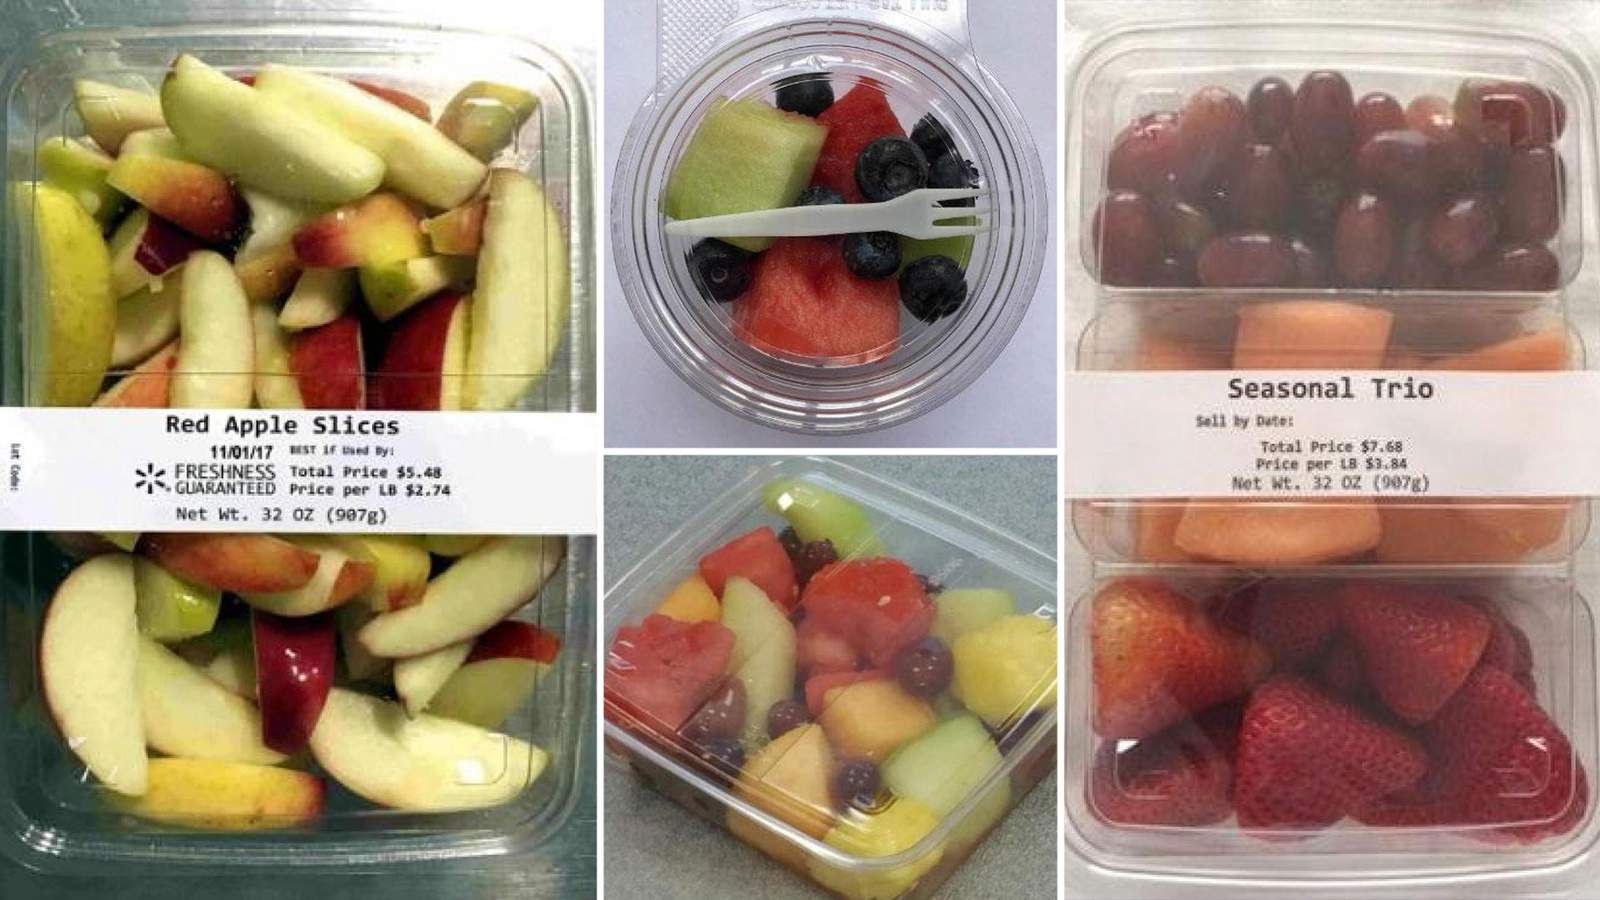 Various fresh fruit items sold at Walmart recalled due to listeria concerns